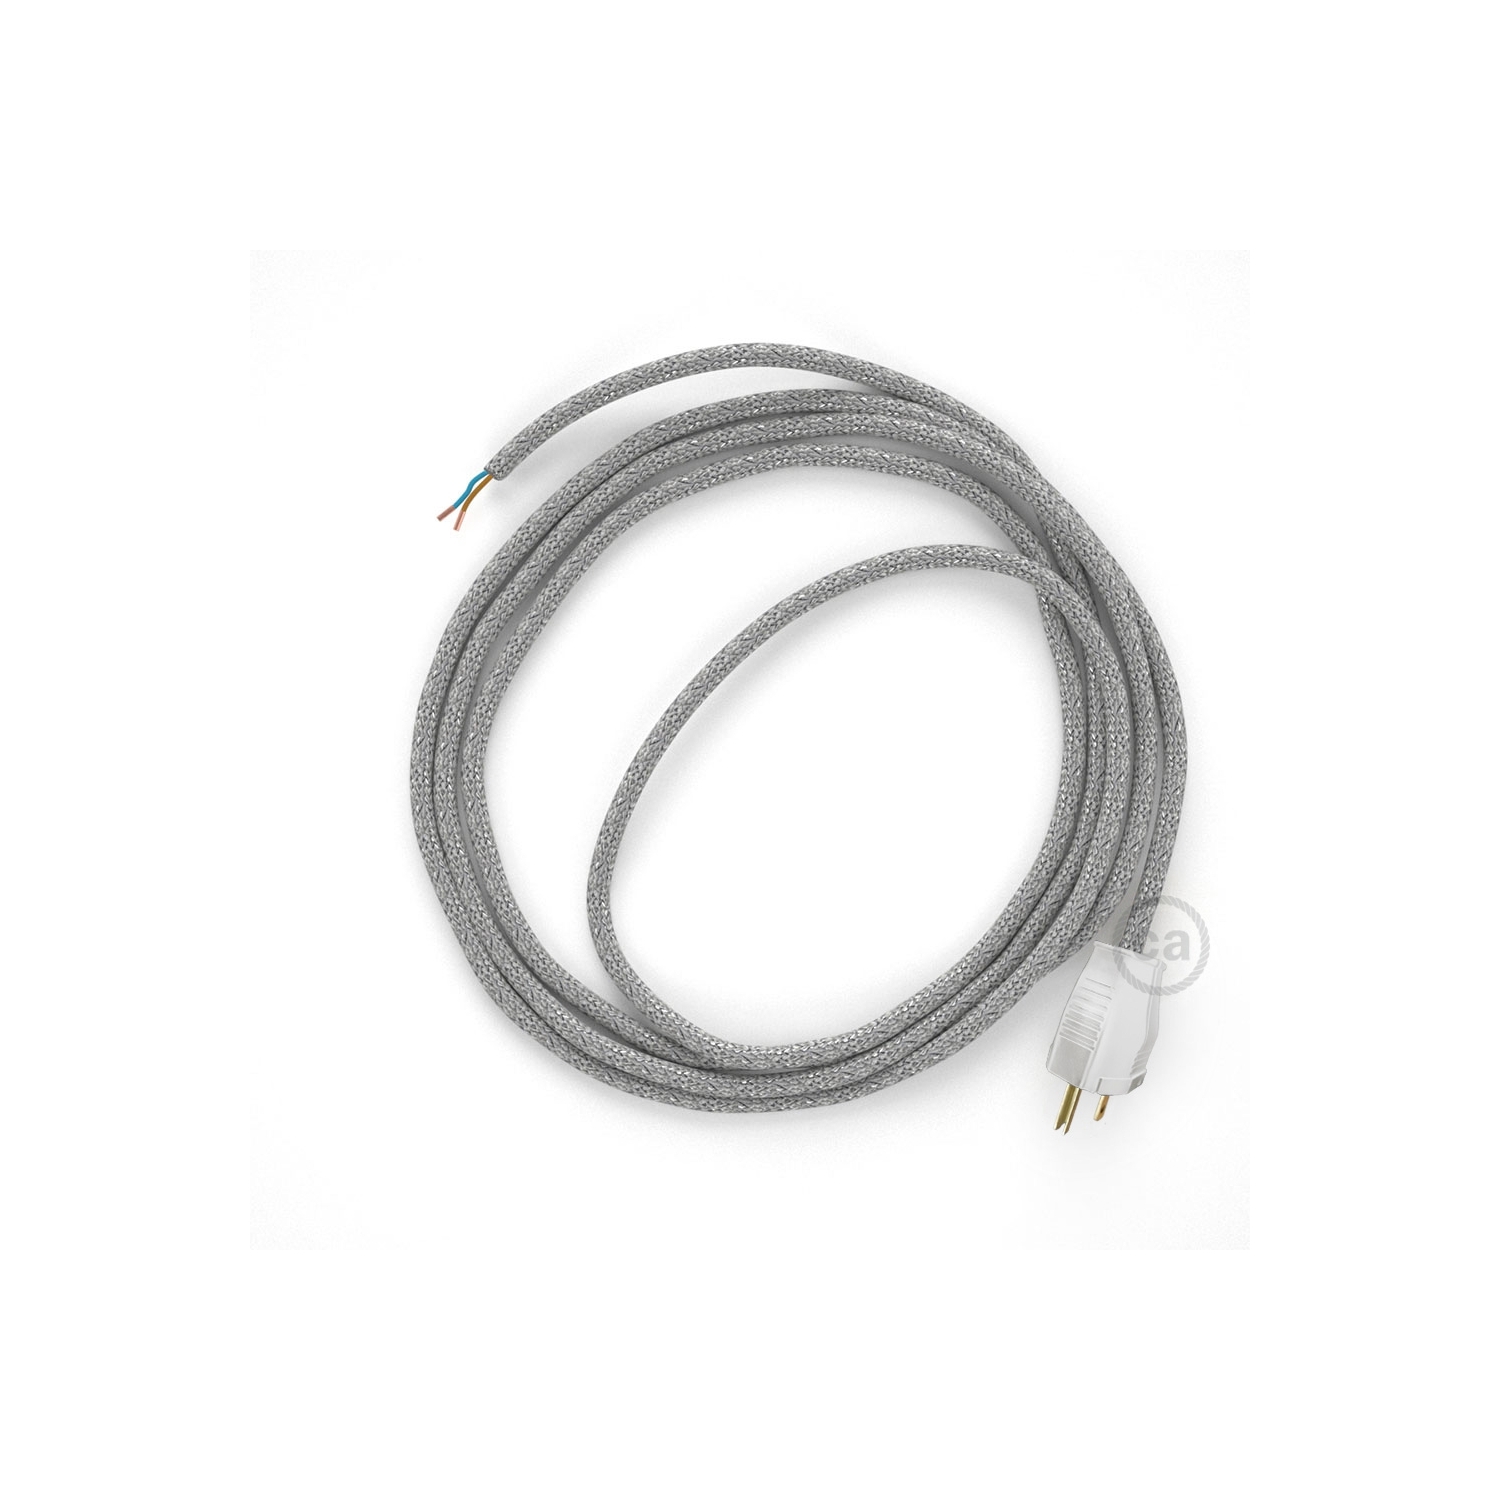 Cord-set - RL02 Silver Glitter Covered Round Cable